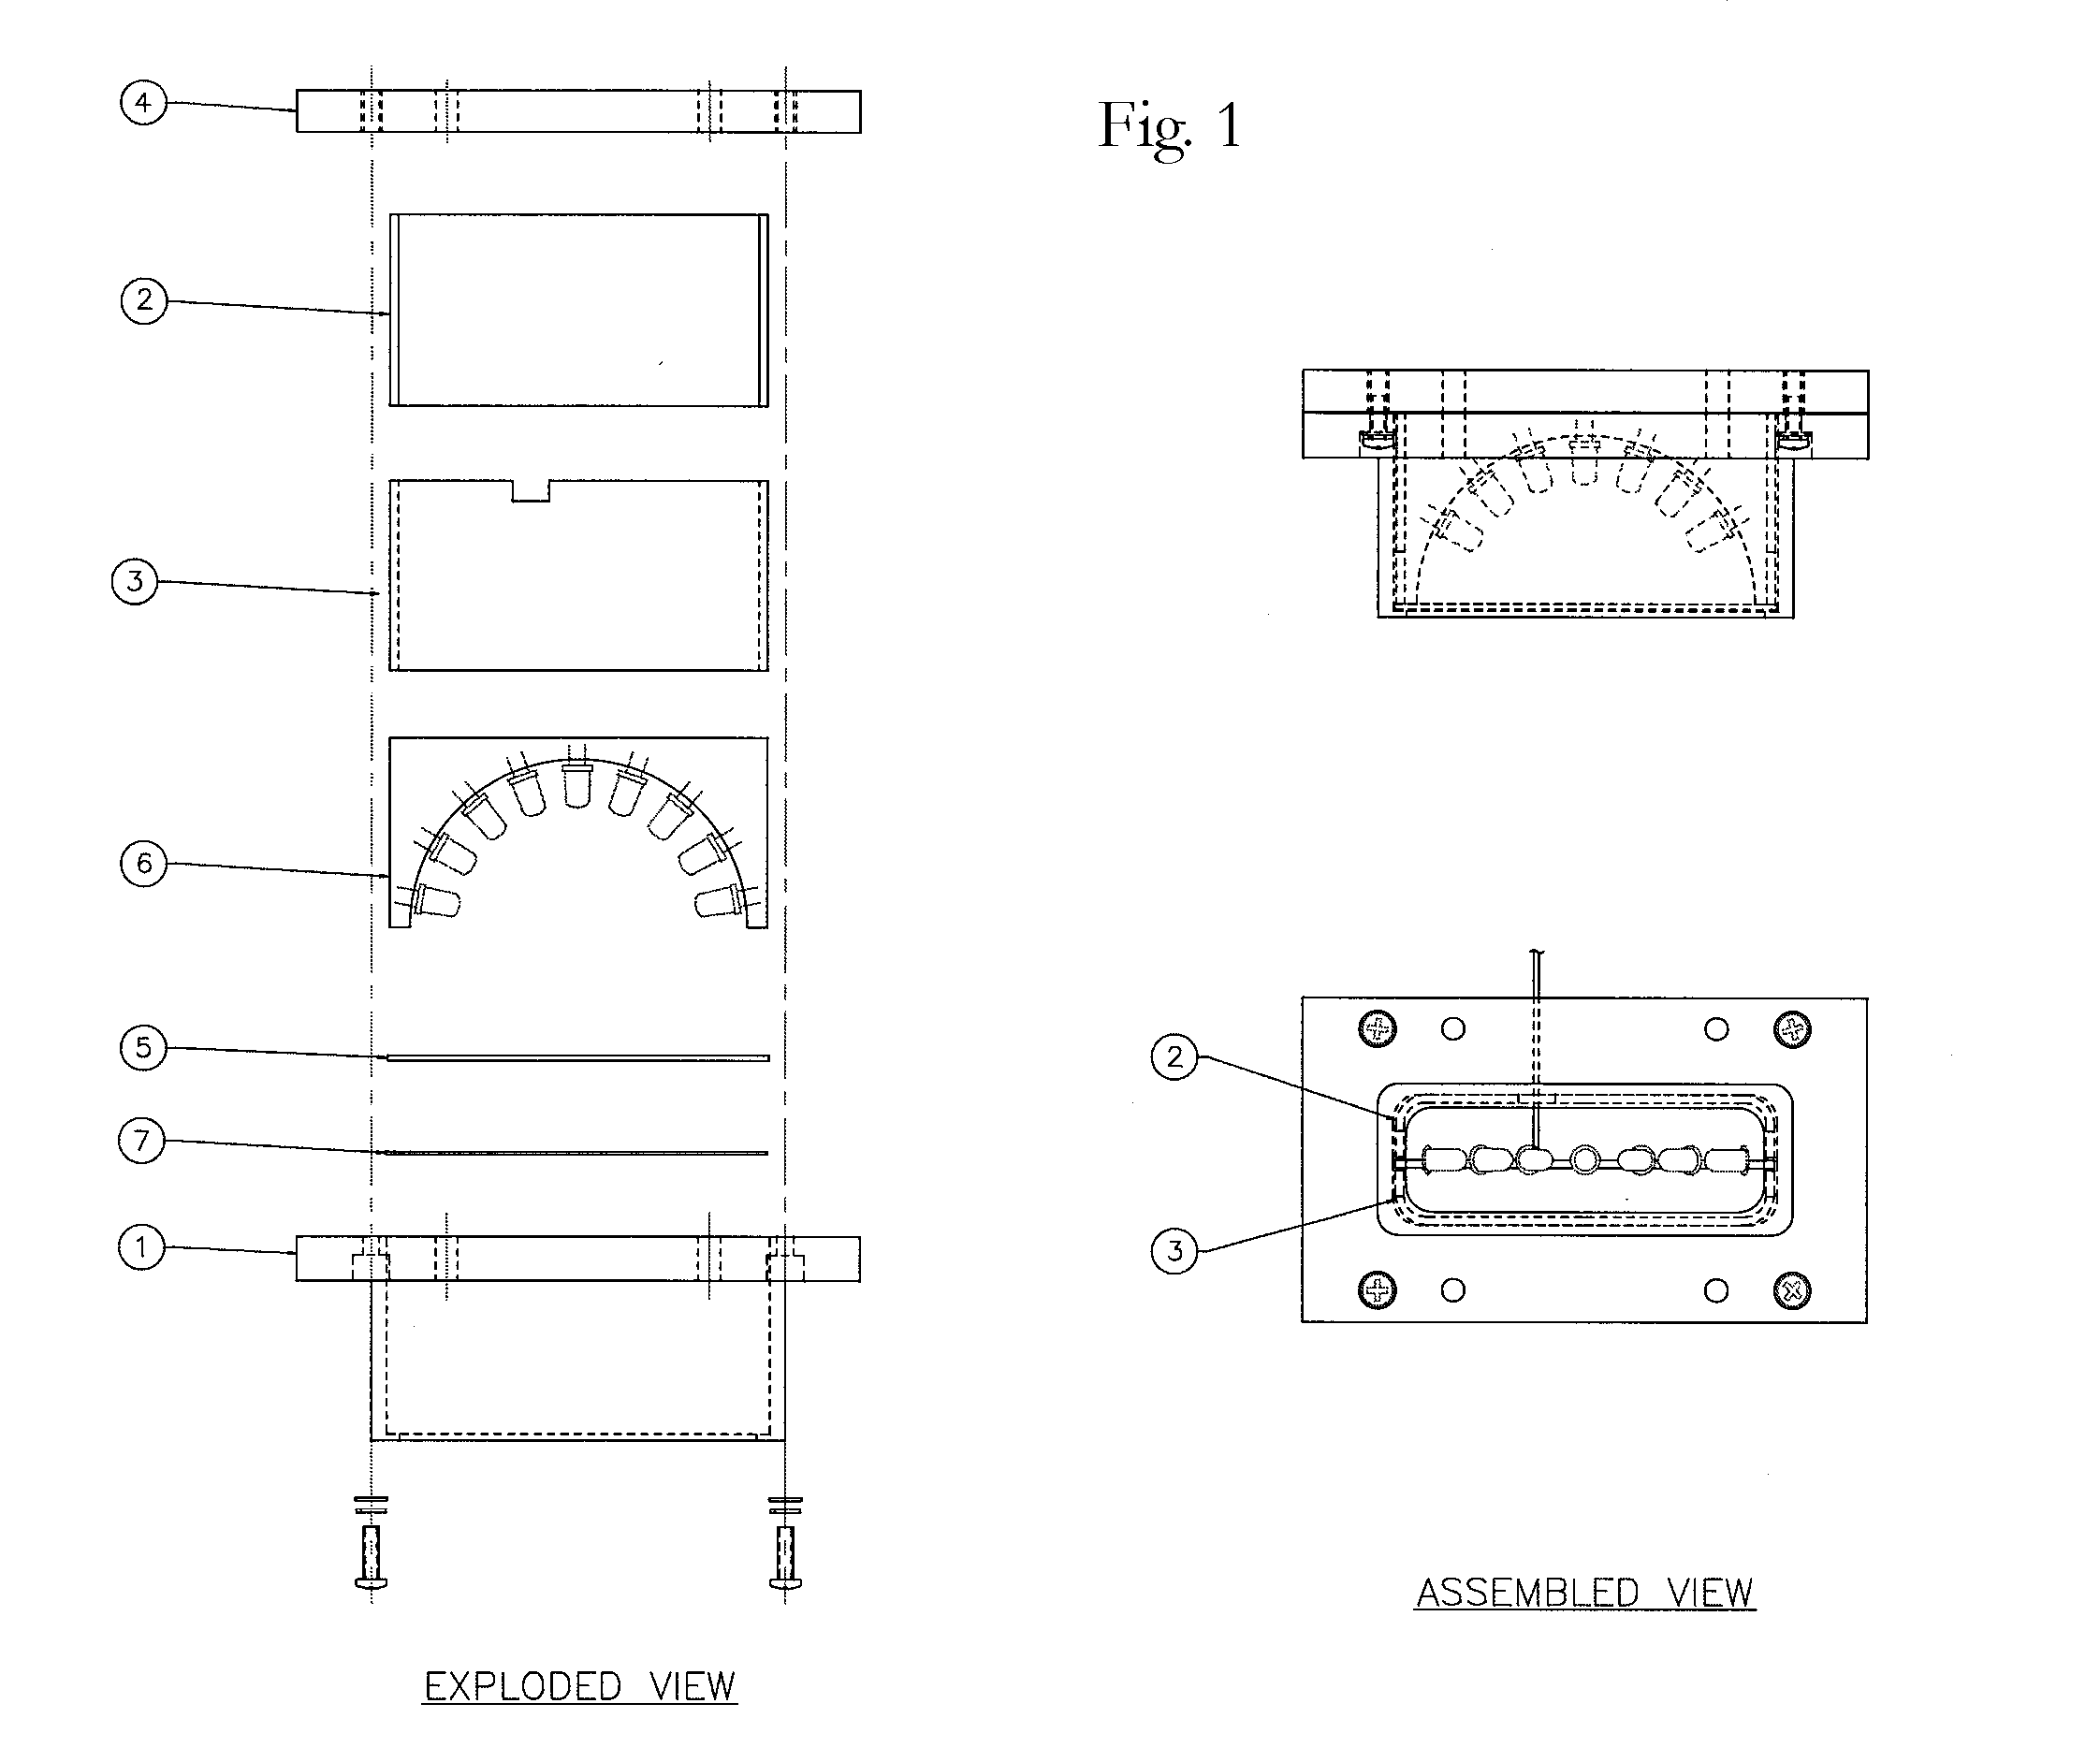 Means of Achieving a Lambertian Distribution Light Source via a Light Emitting Diode Array